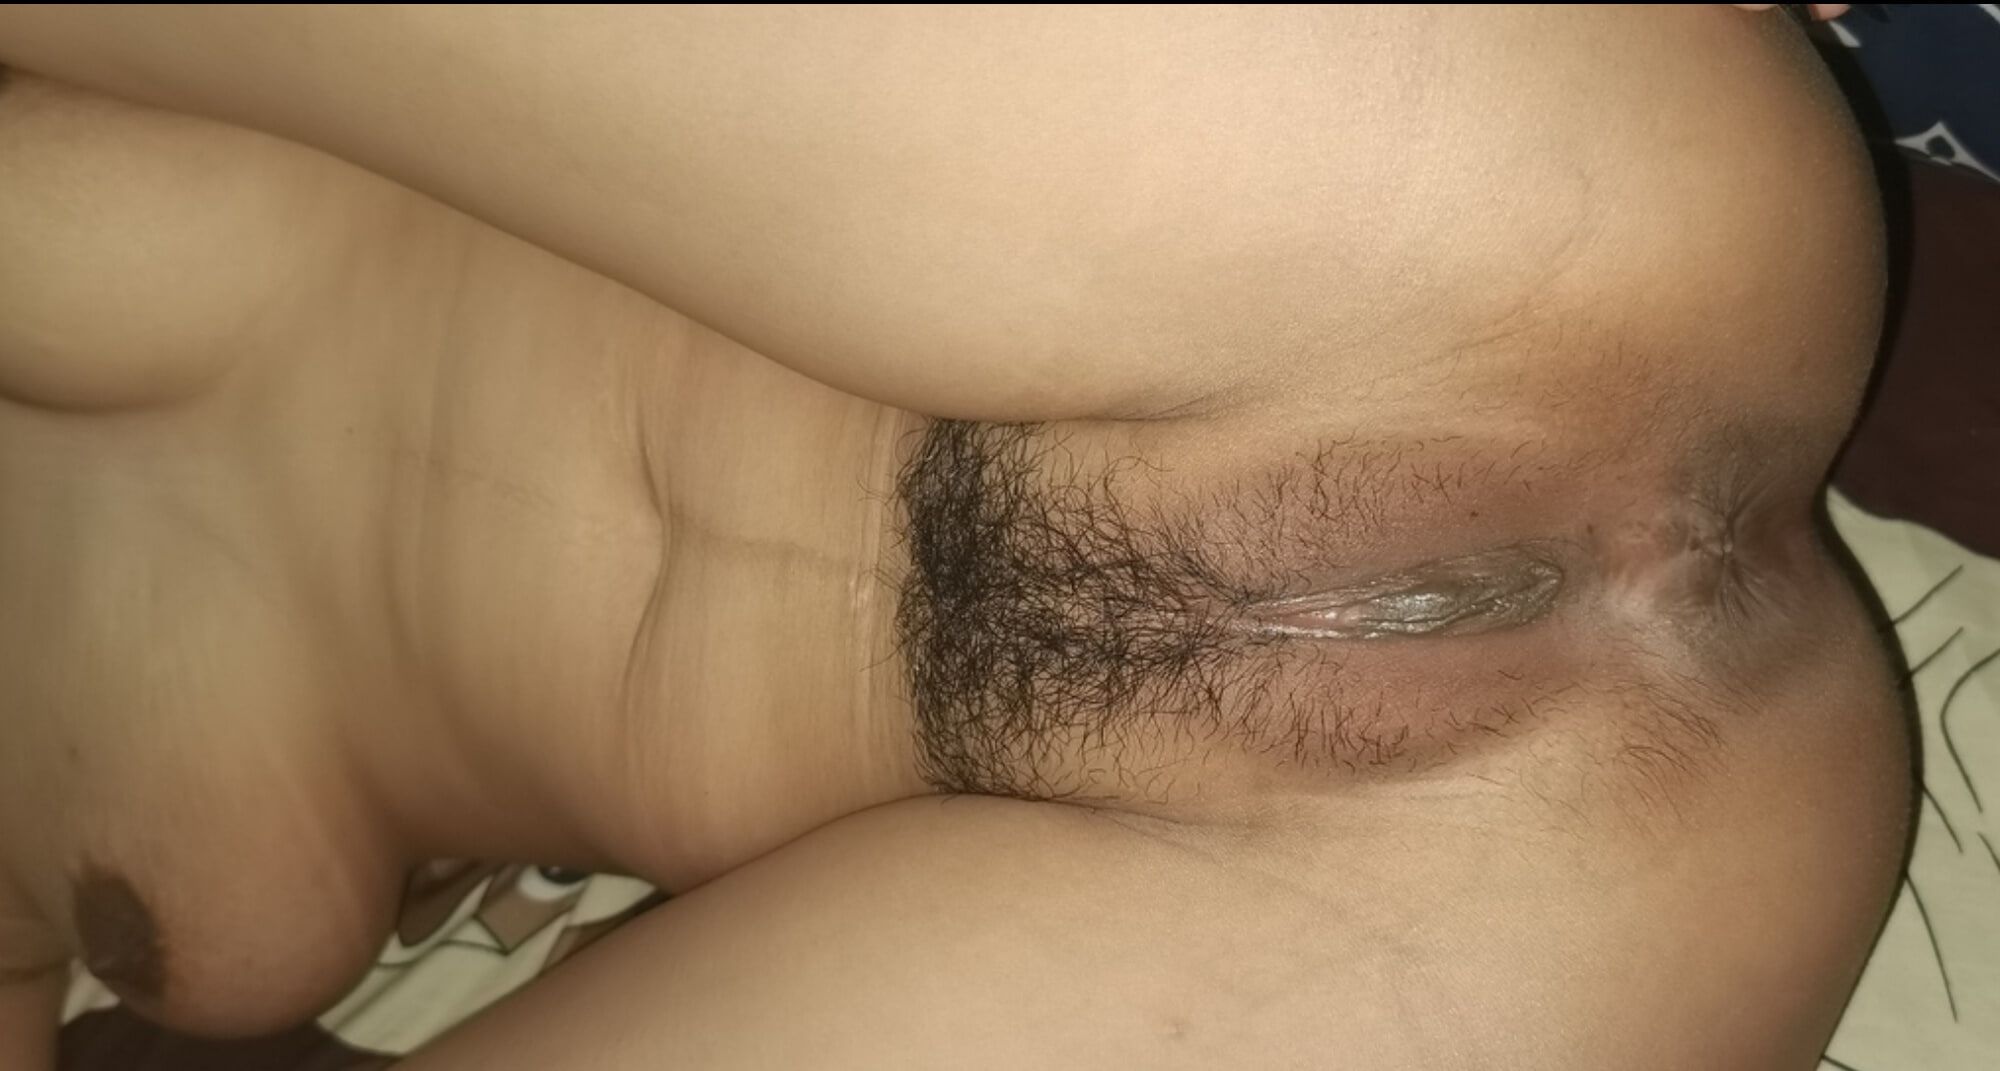 Come to lick my pussy 